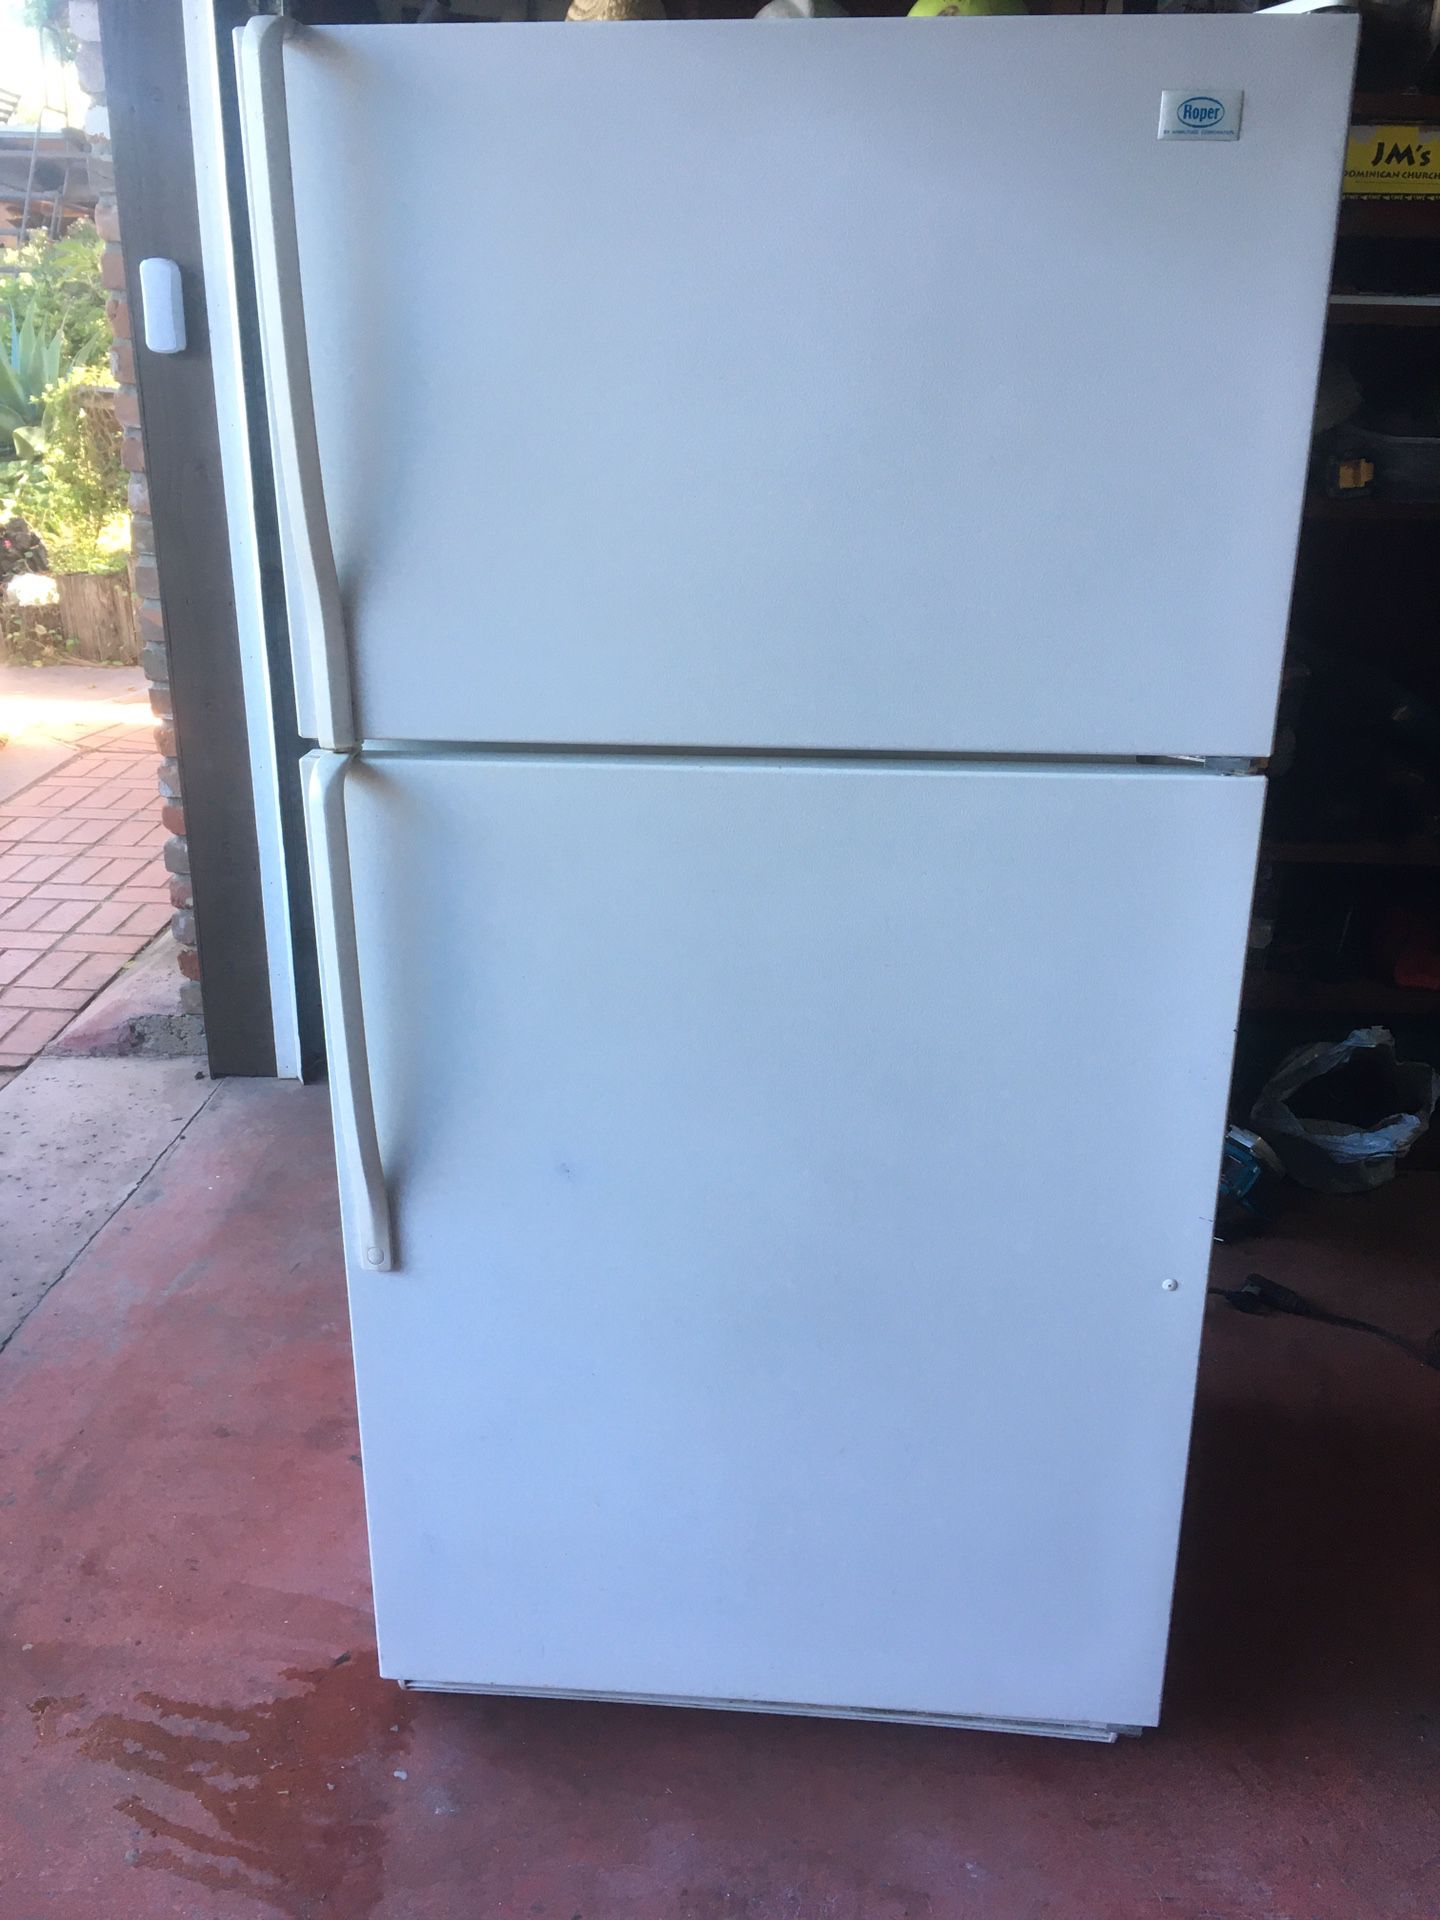 Nice clean working refrigerator with top freezer